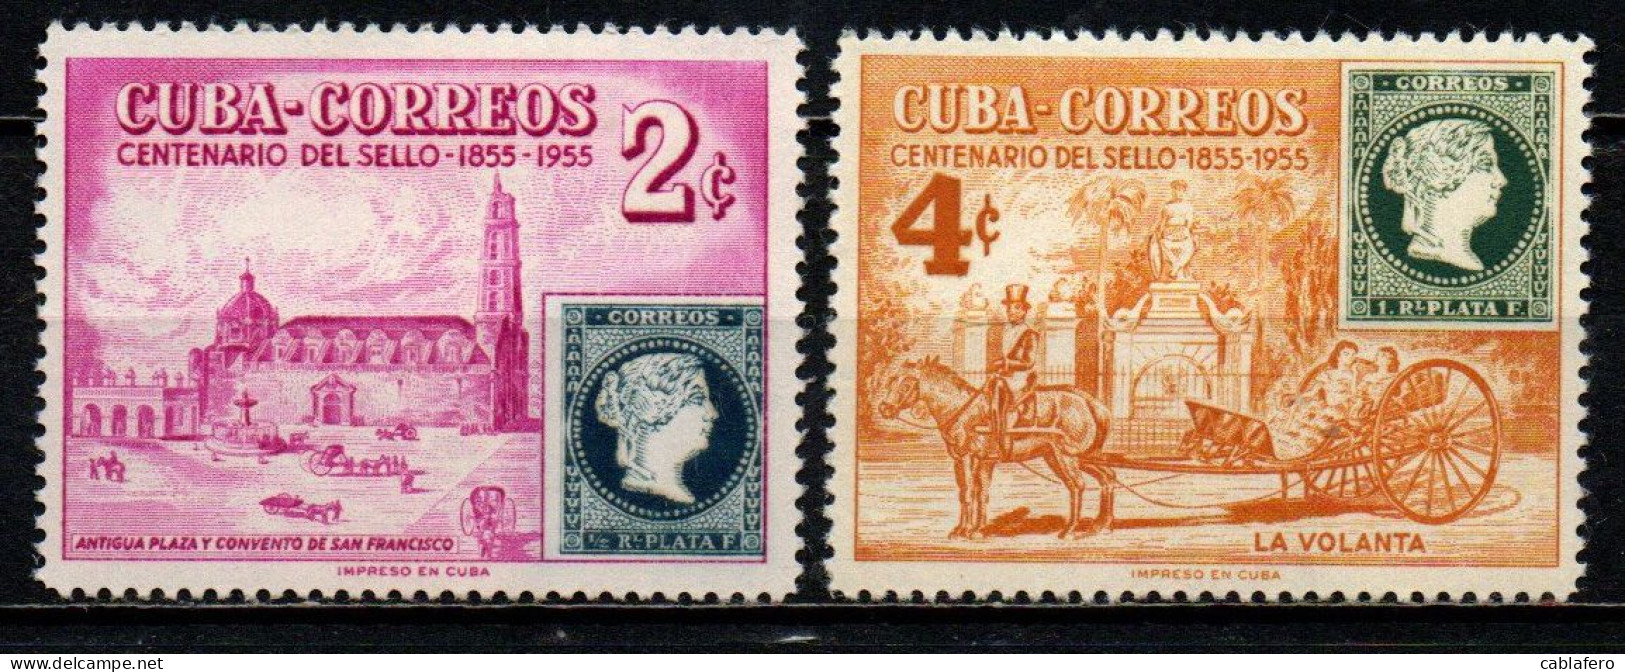 CUBA - 1955 -  Cent. Of Cuba’s 1st Postage Stamps - MH - Neufs